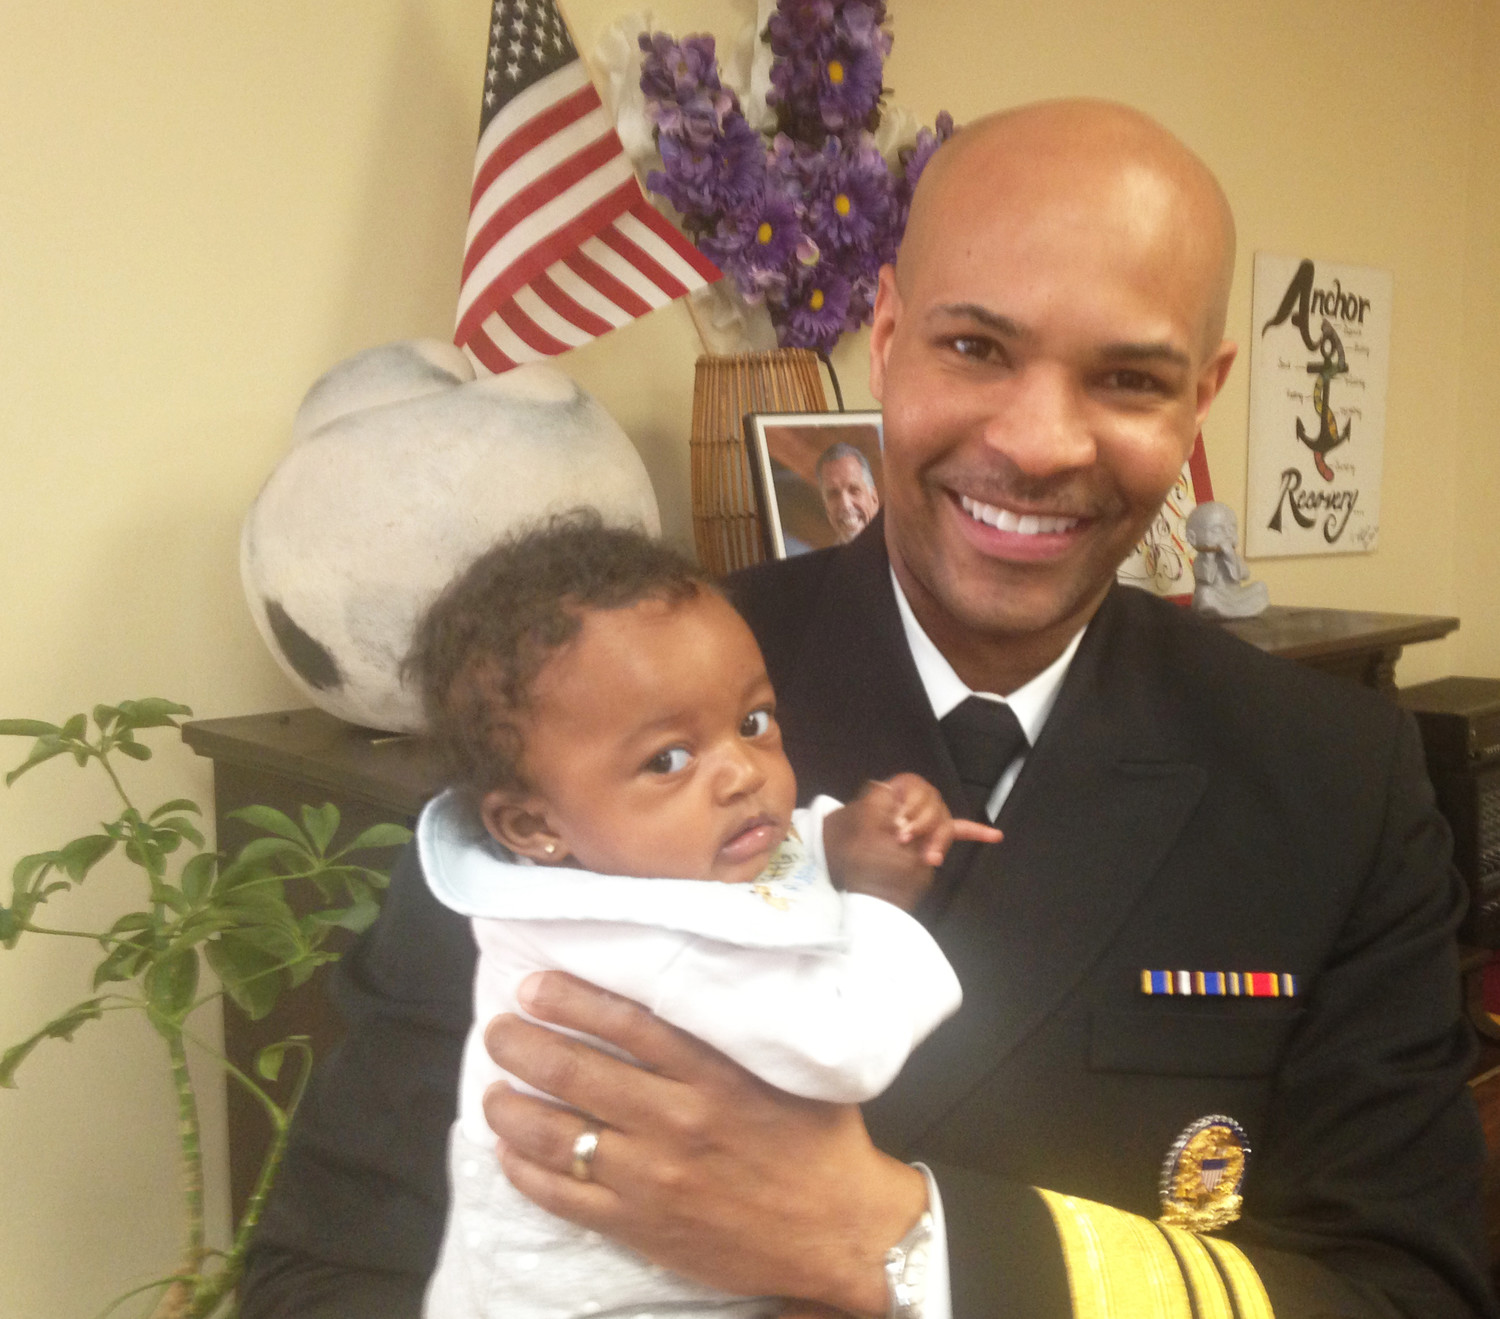 U.S. Surgeon General Dr. Jerome Adams holding a young baby girl during an interview at the Anchor Recovery Community Center on Jan. 26. Above his shoulder is the photograph of a smiling Jim Gillen, one of the leaders of the recovery community in Rhode Island.